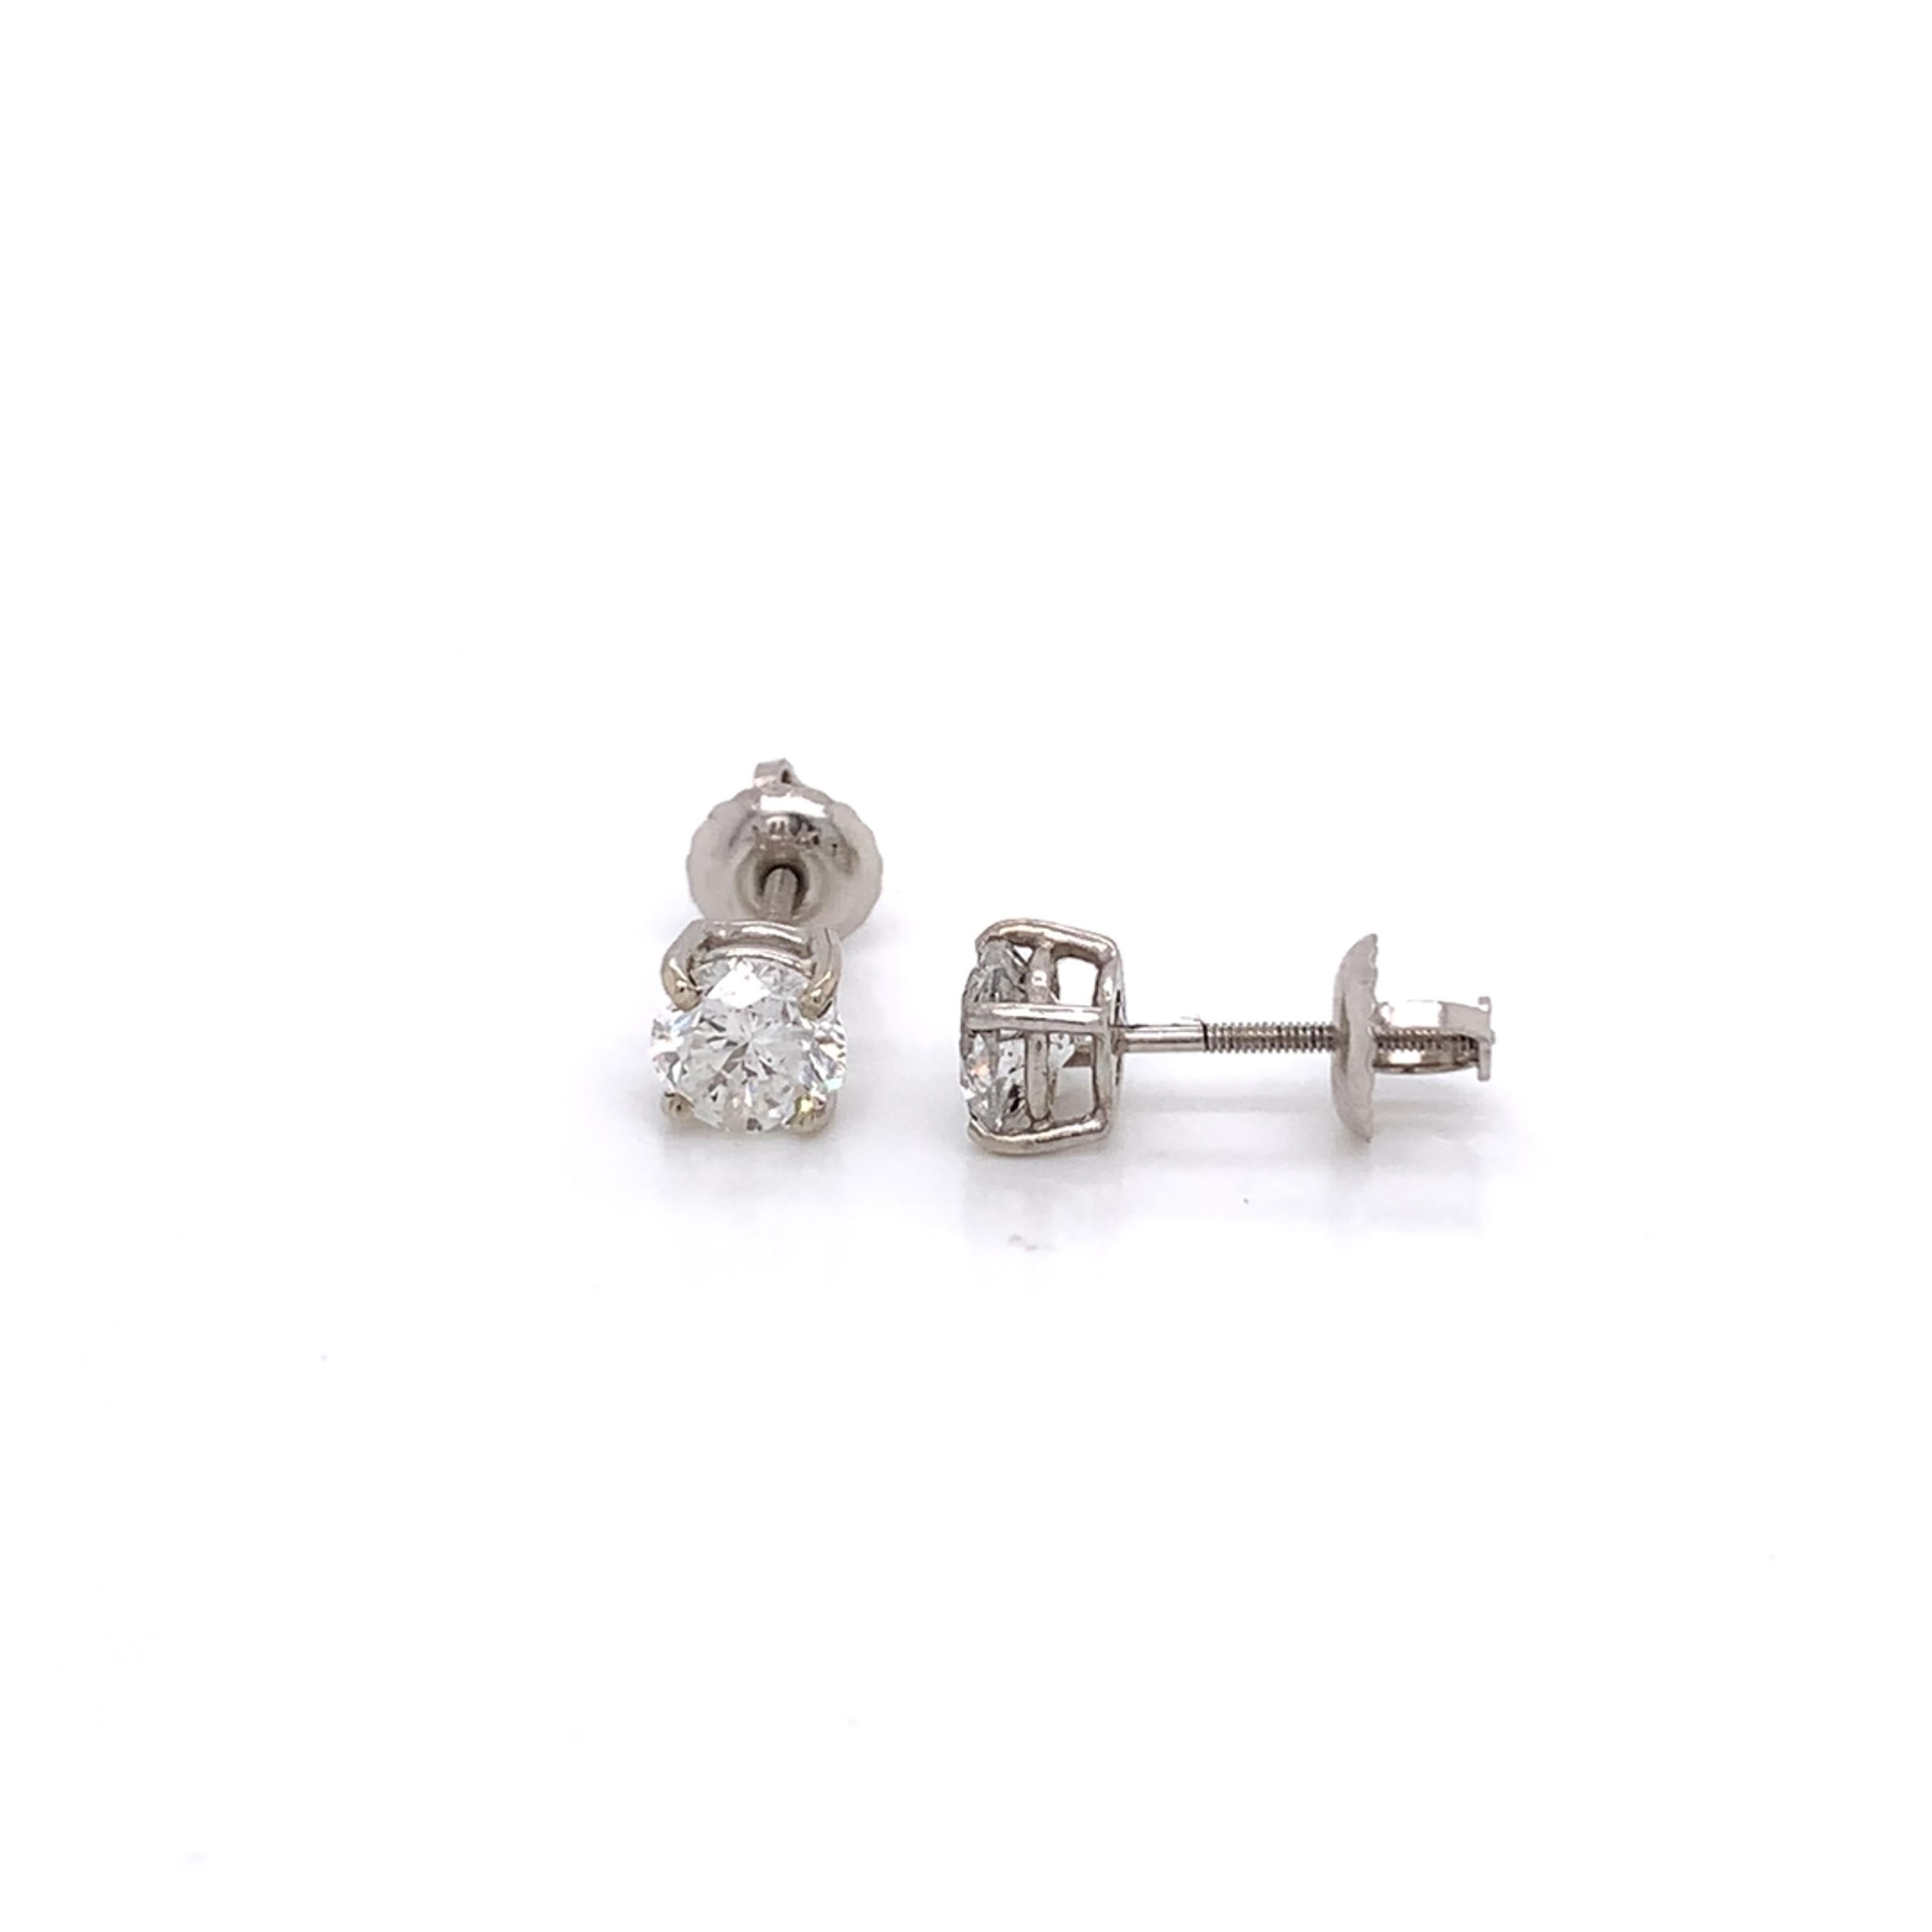 Diamond Stud earrings made with real/natural brilliant cut diamonds. Total Diamond Weight: 1.04 carats. Diamond Quantity: 2 round diamonds. Color: G-H Clarity: SI3. Mounted on 18 karat white gold screw-back settings.